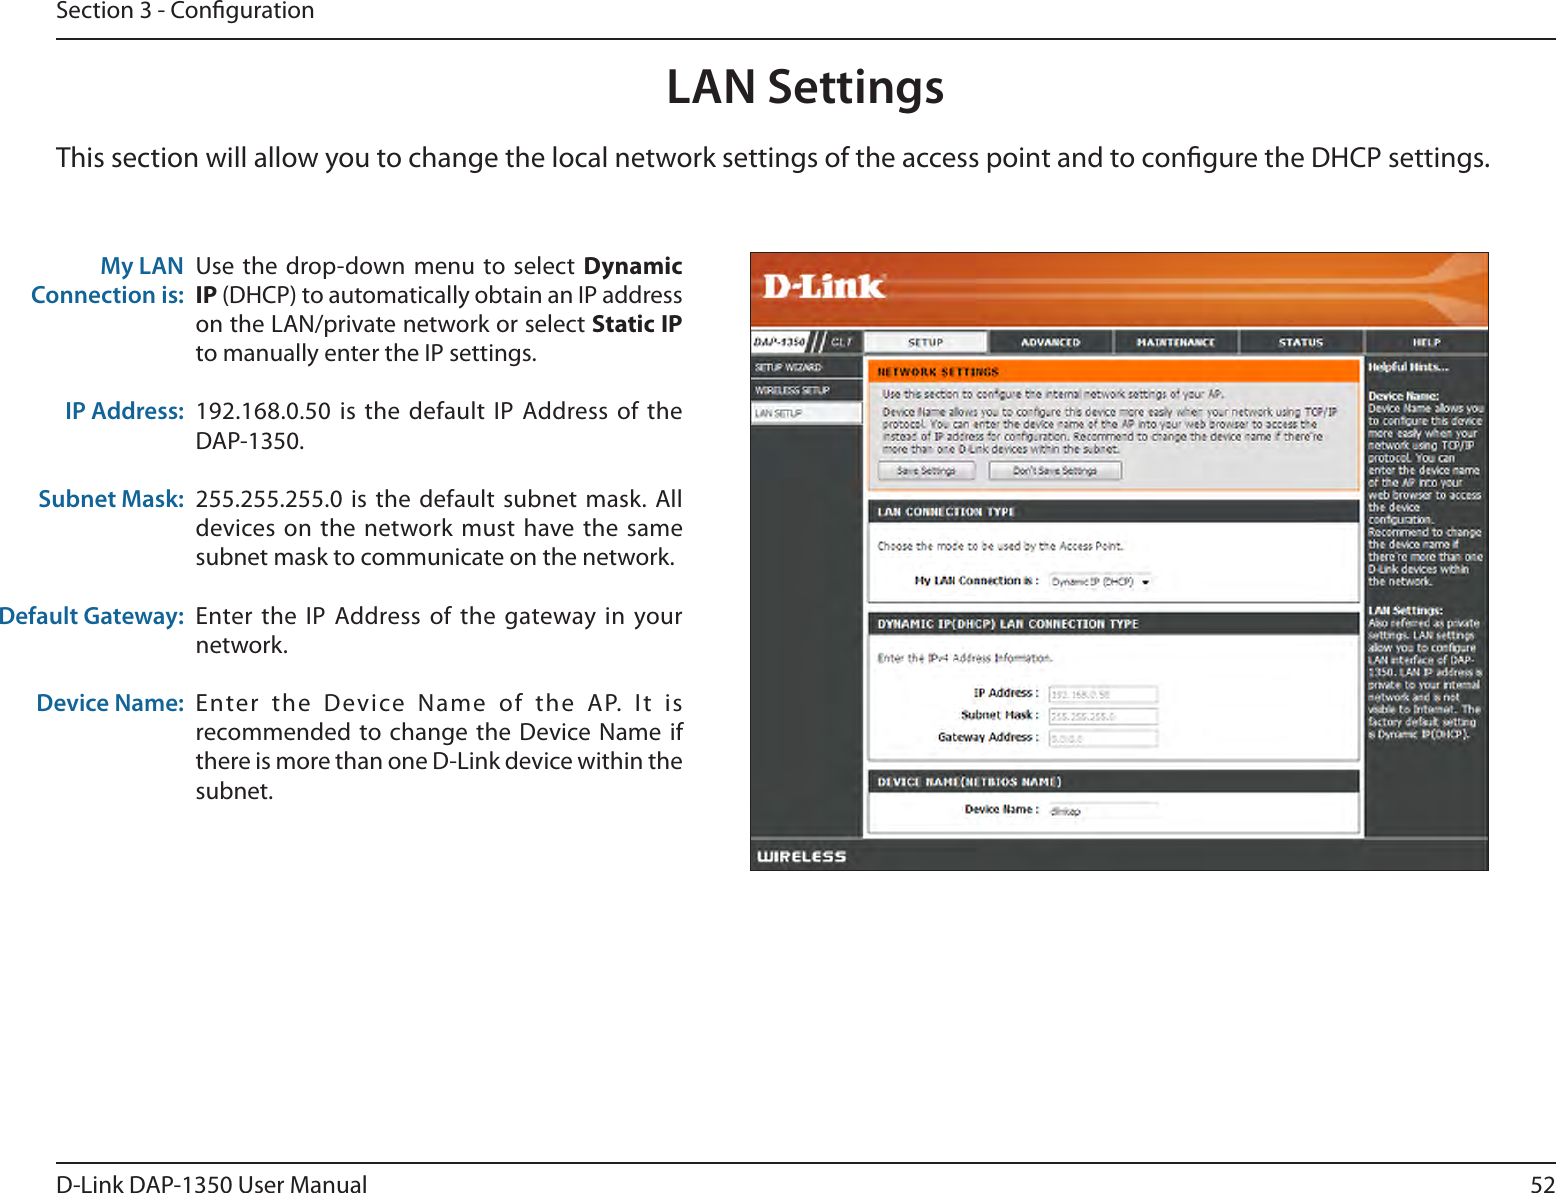 52D-Link DAP-1350 User ManualSection 3 - CongurationLAN SettingsThis section will allow you to change the local network settings of the access point and to congure the DHCP settings.My LAN Connection is:IP Address:Subnet Mask:Default Gateway:Device Name:Use the drop-down menu  to select Dynamic IP (DHCP) to automatically obtain an IP address on the LAN/private network or select Static IP to manually enter the IP settings.192.168.0.50 is  the default  IP Address of the DAP-1350.255.255.255.0 is  the  default subnet  mask.  All devices on the  network must  have the same subnet mask to communicate on the network.Enter the IP  Address of  the gateway in your network.Enter  the  Device  Name  of  the  AP.  It  is recommended to change the  Device Name  if there is more than one D-Link device within the subnet.